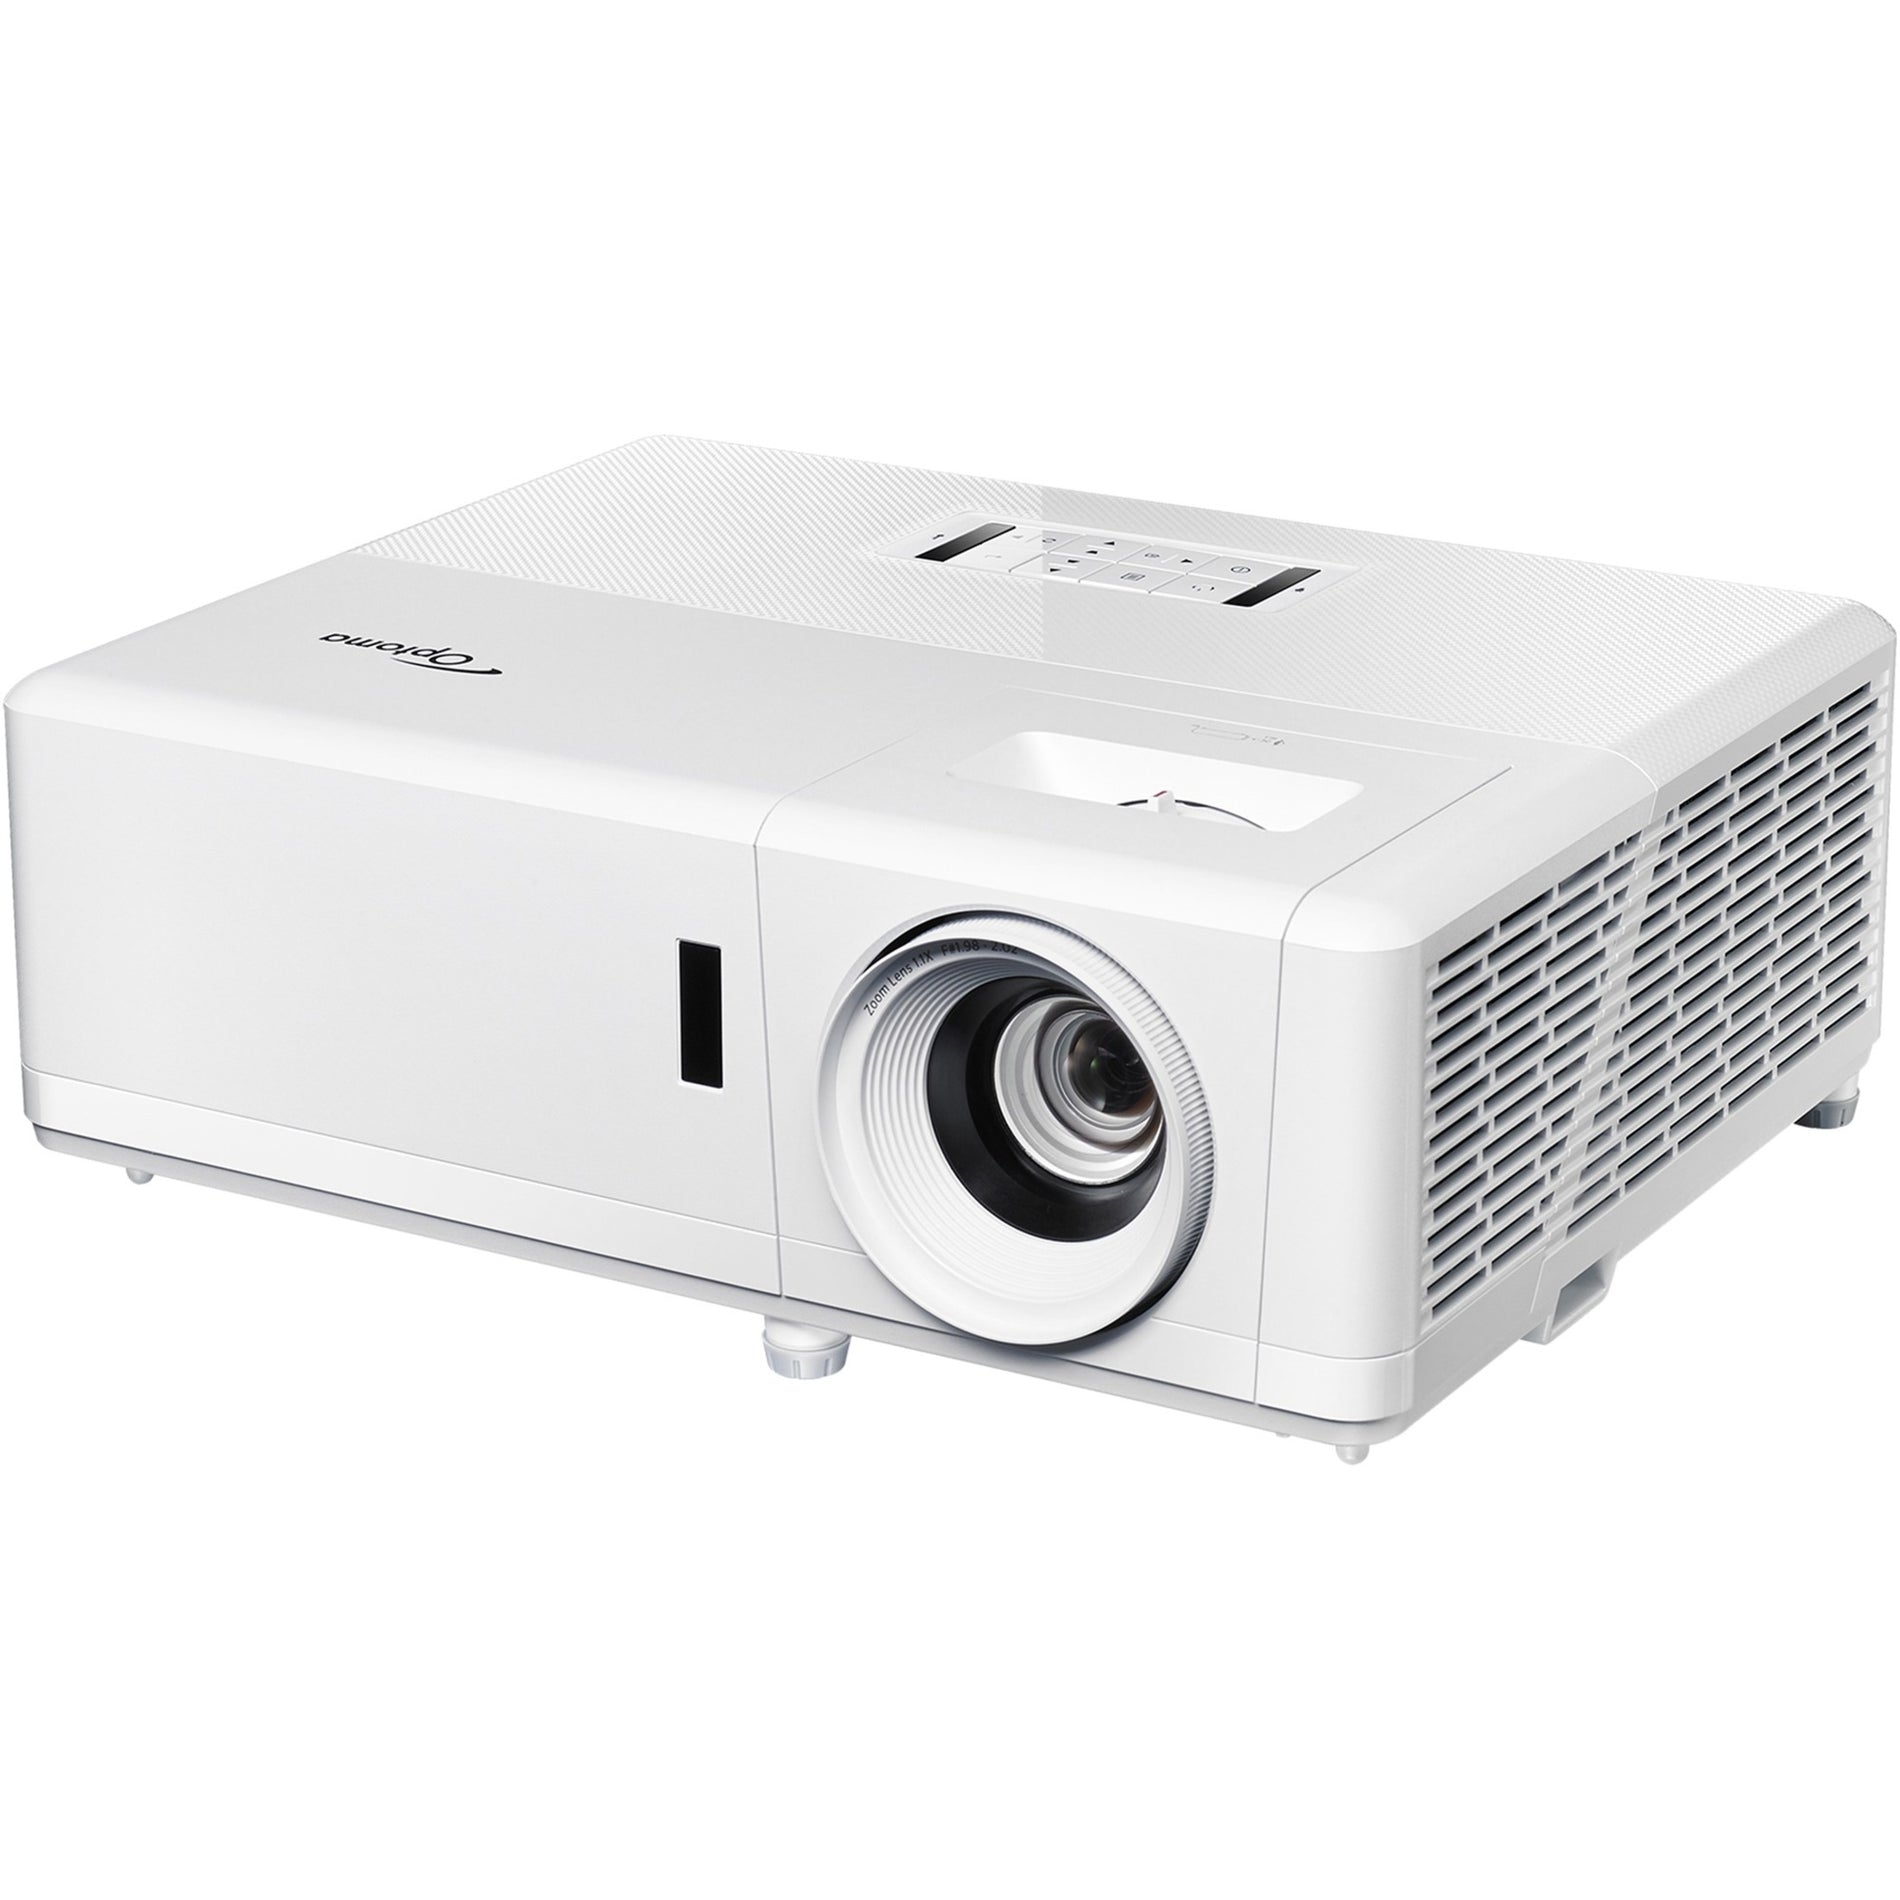 Optoma UHZ45 3D DLP Projector - 4K UHD, 3800 lm, Laser Lamp, Ceiling Mountable [Discontinued]